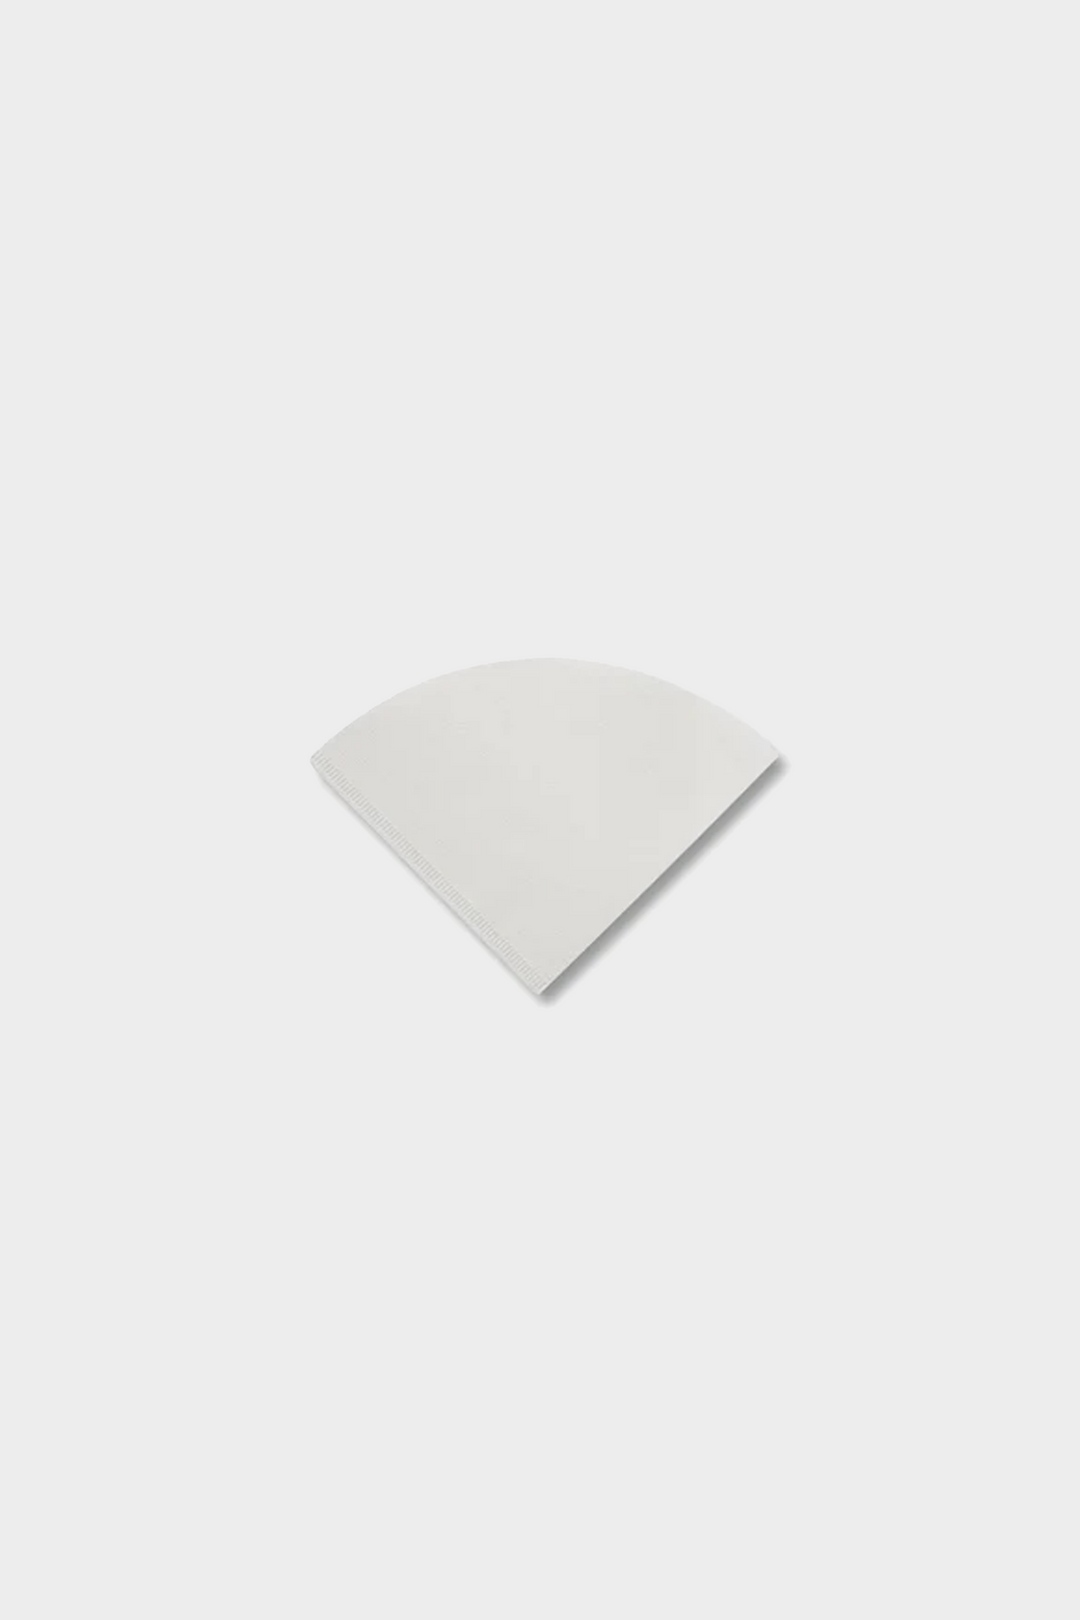 Hario x Project Waterfall Filter paper 02